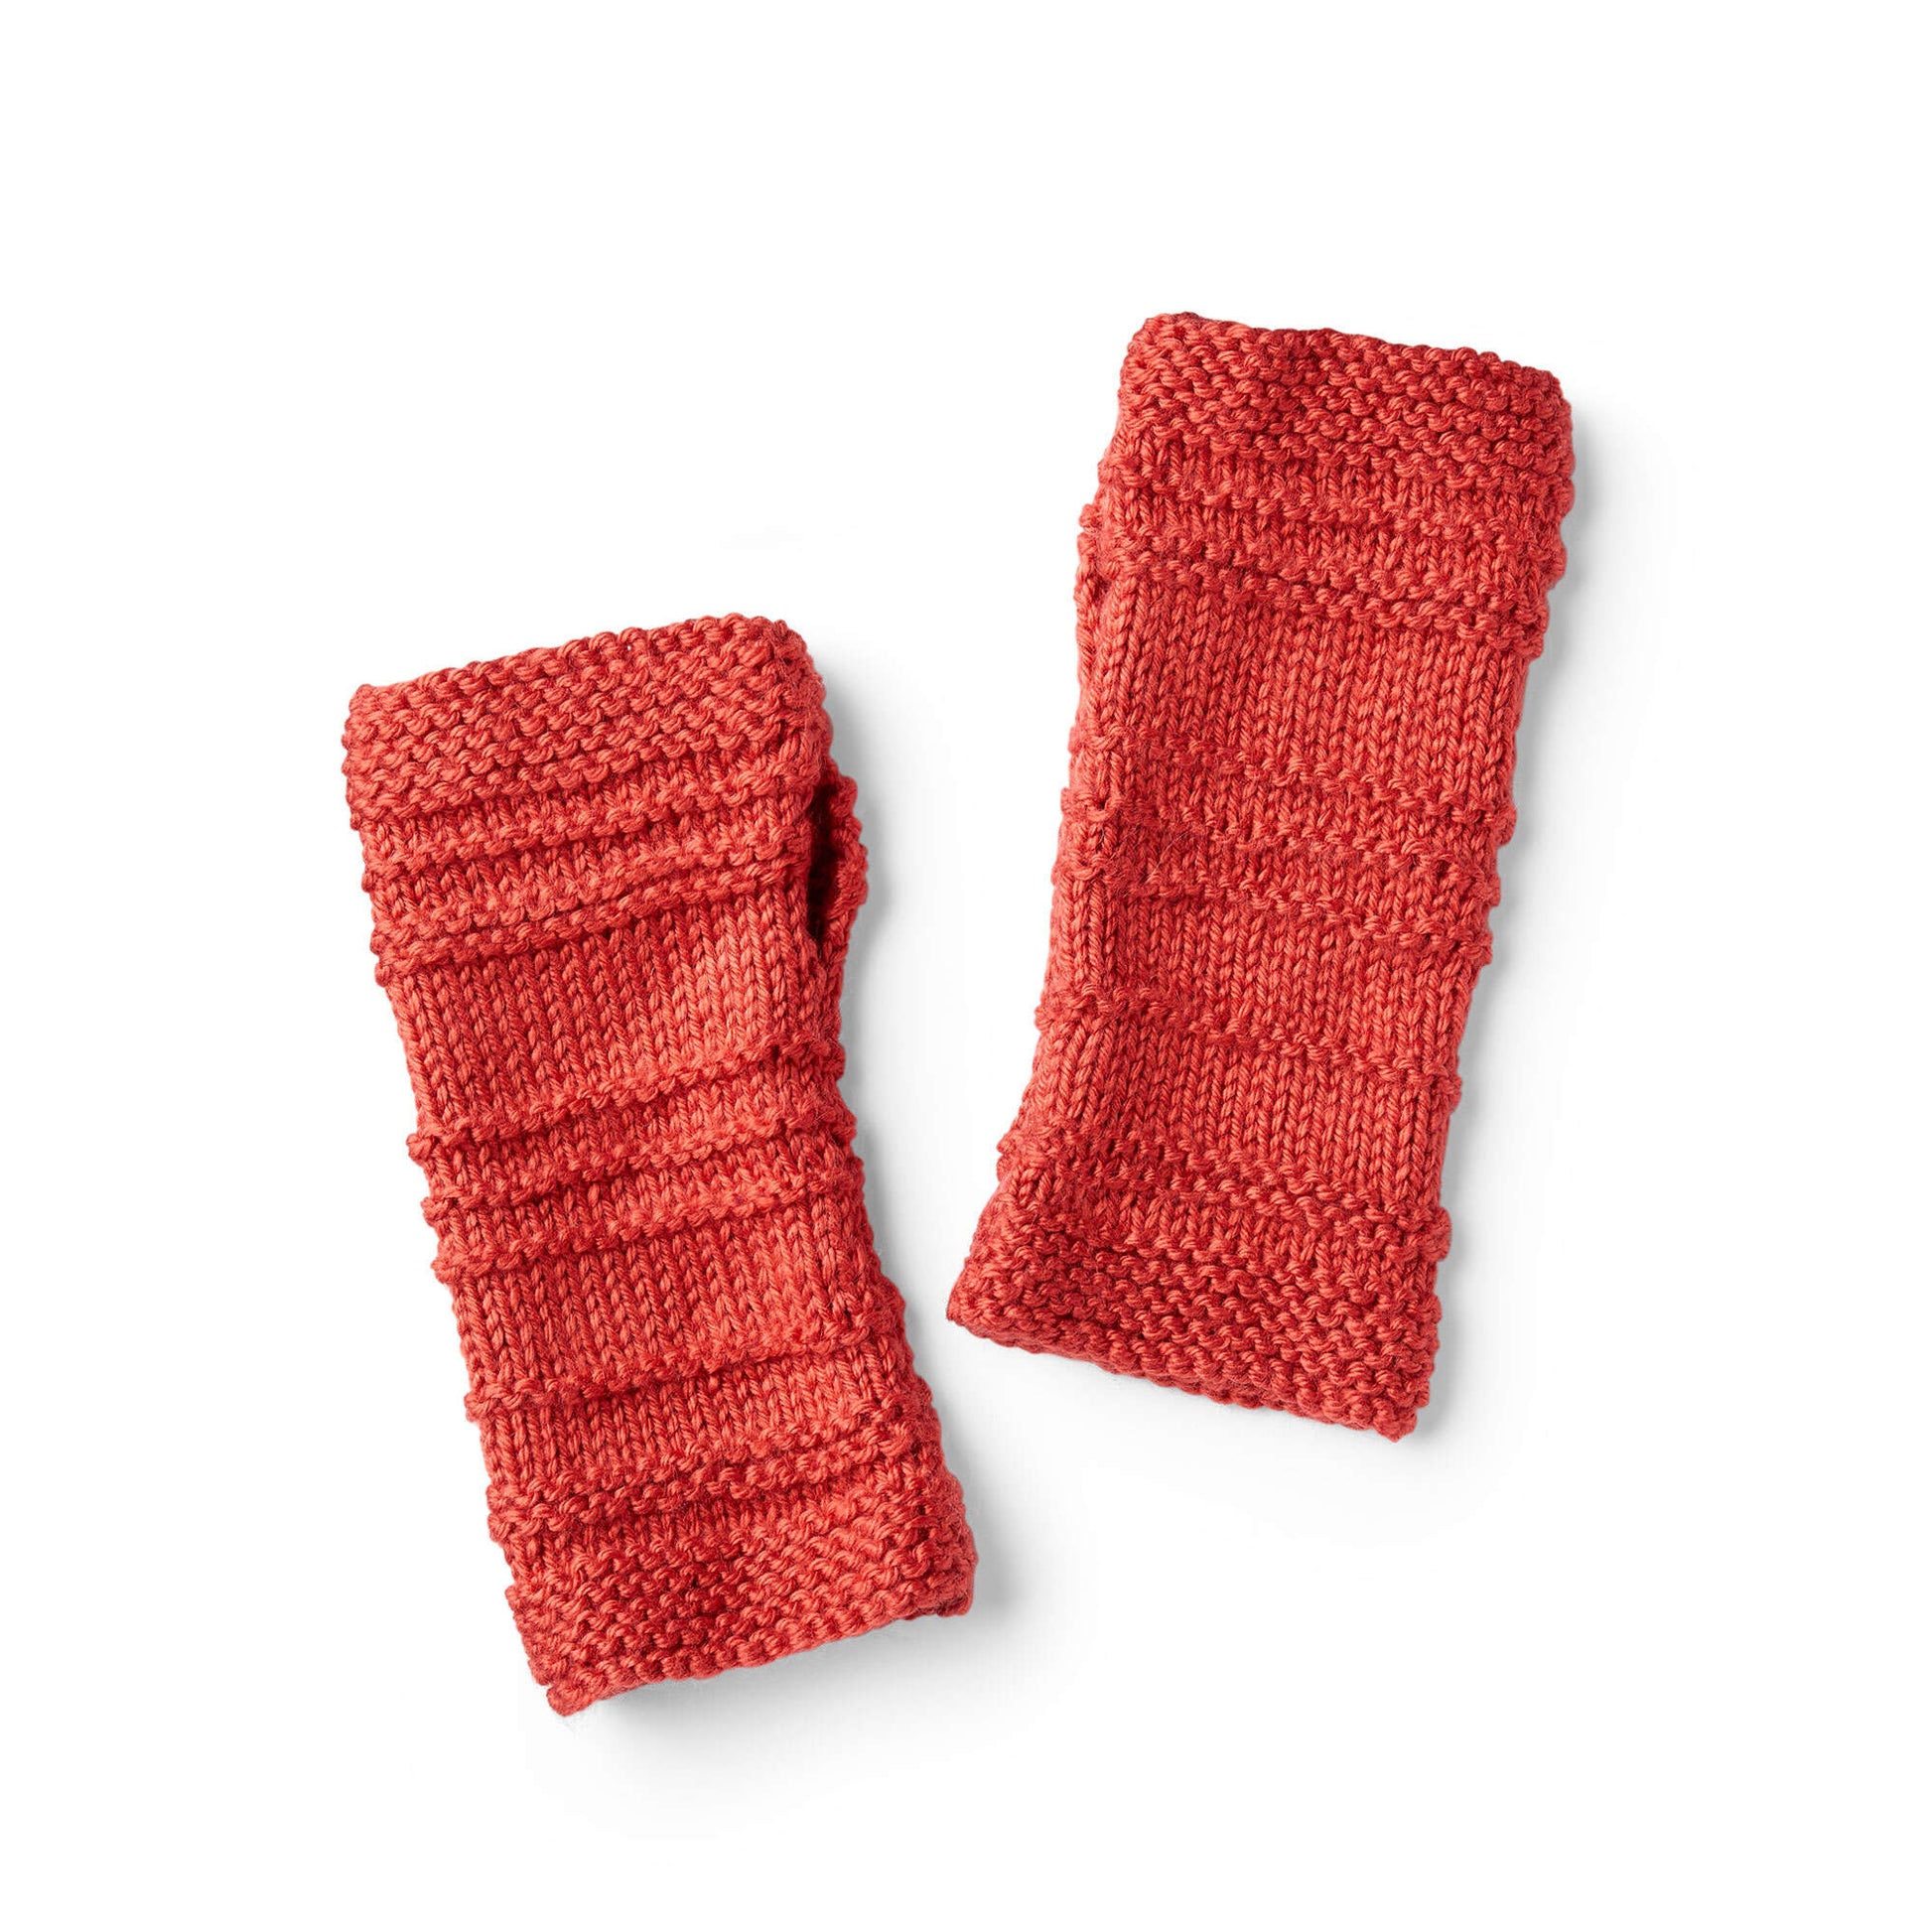 Free Red Heart Road Trip Mitts Knit Pattern